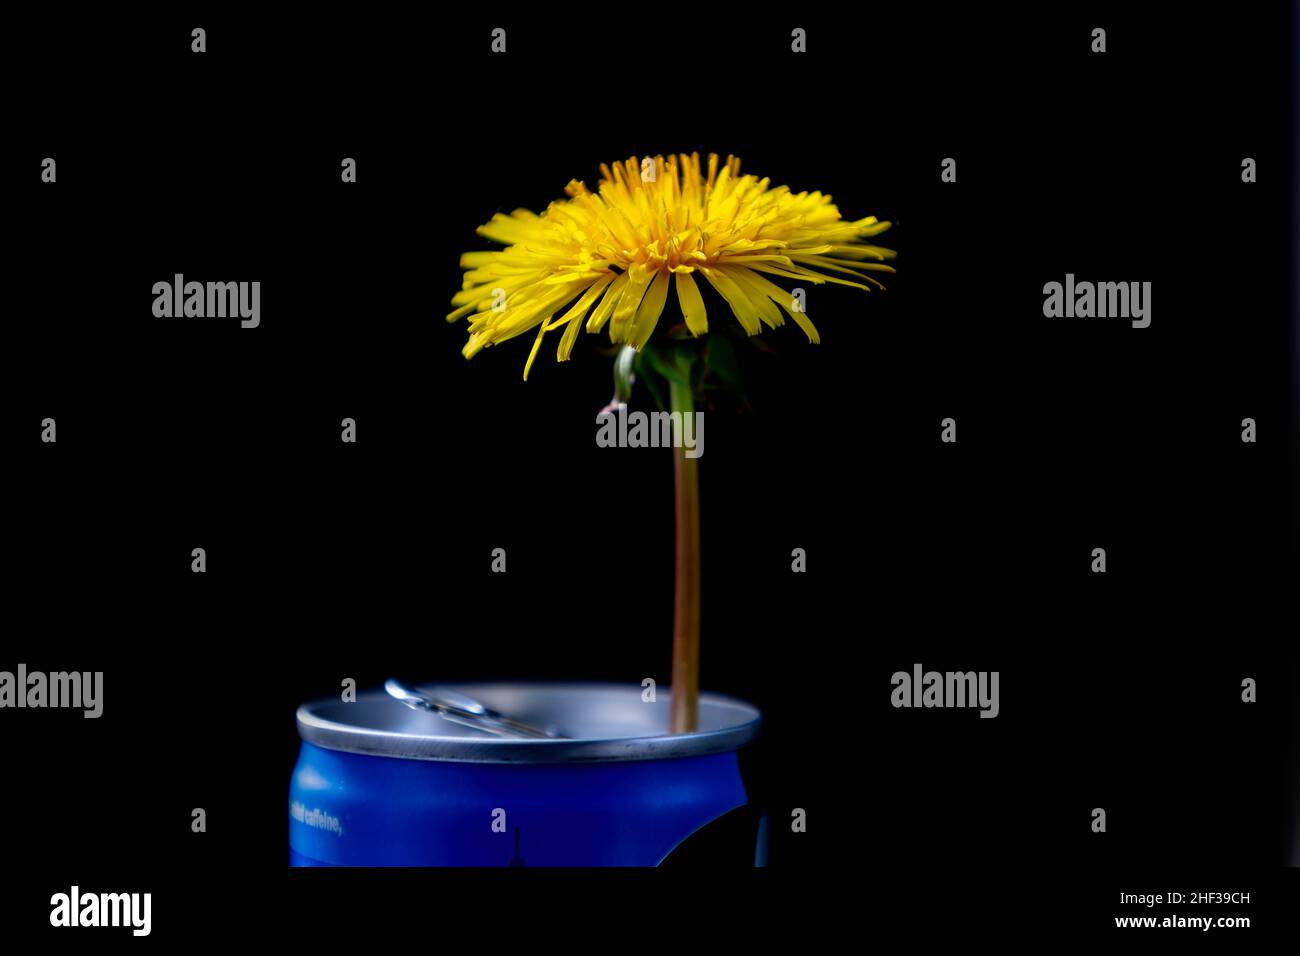 Wild yellow Dandelion picked from a park and placed in an old drinks can against a black background Stock Photo